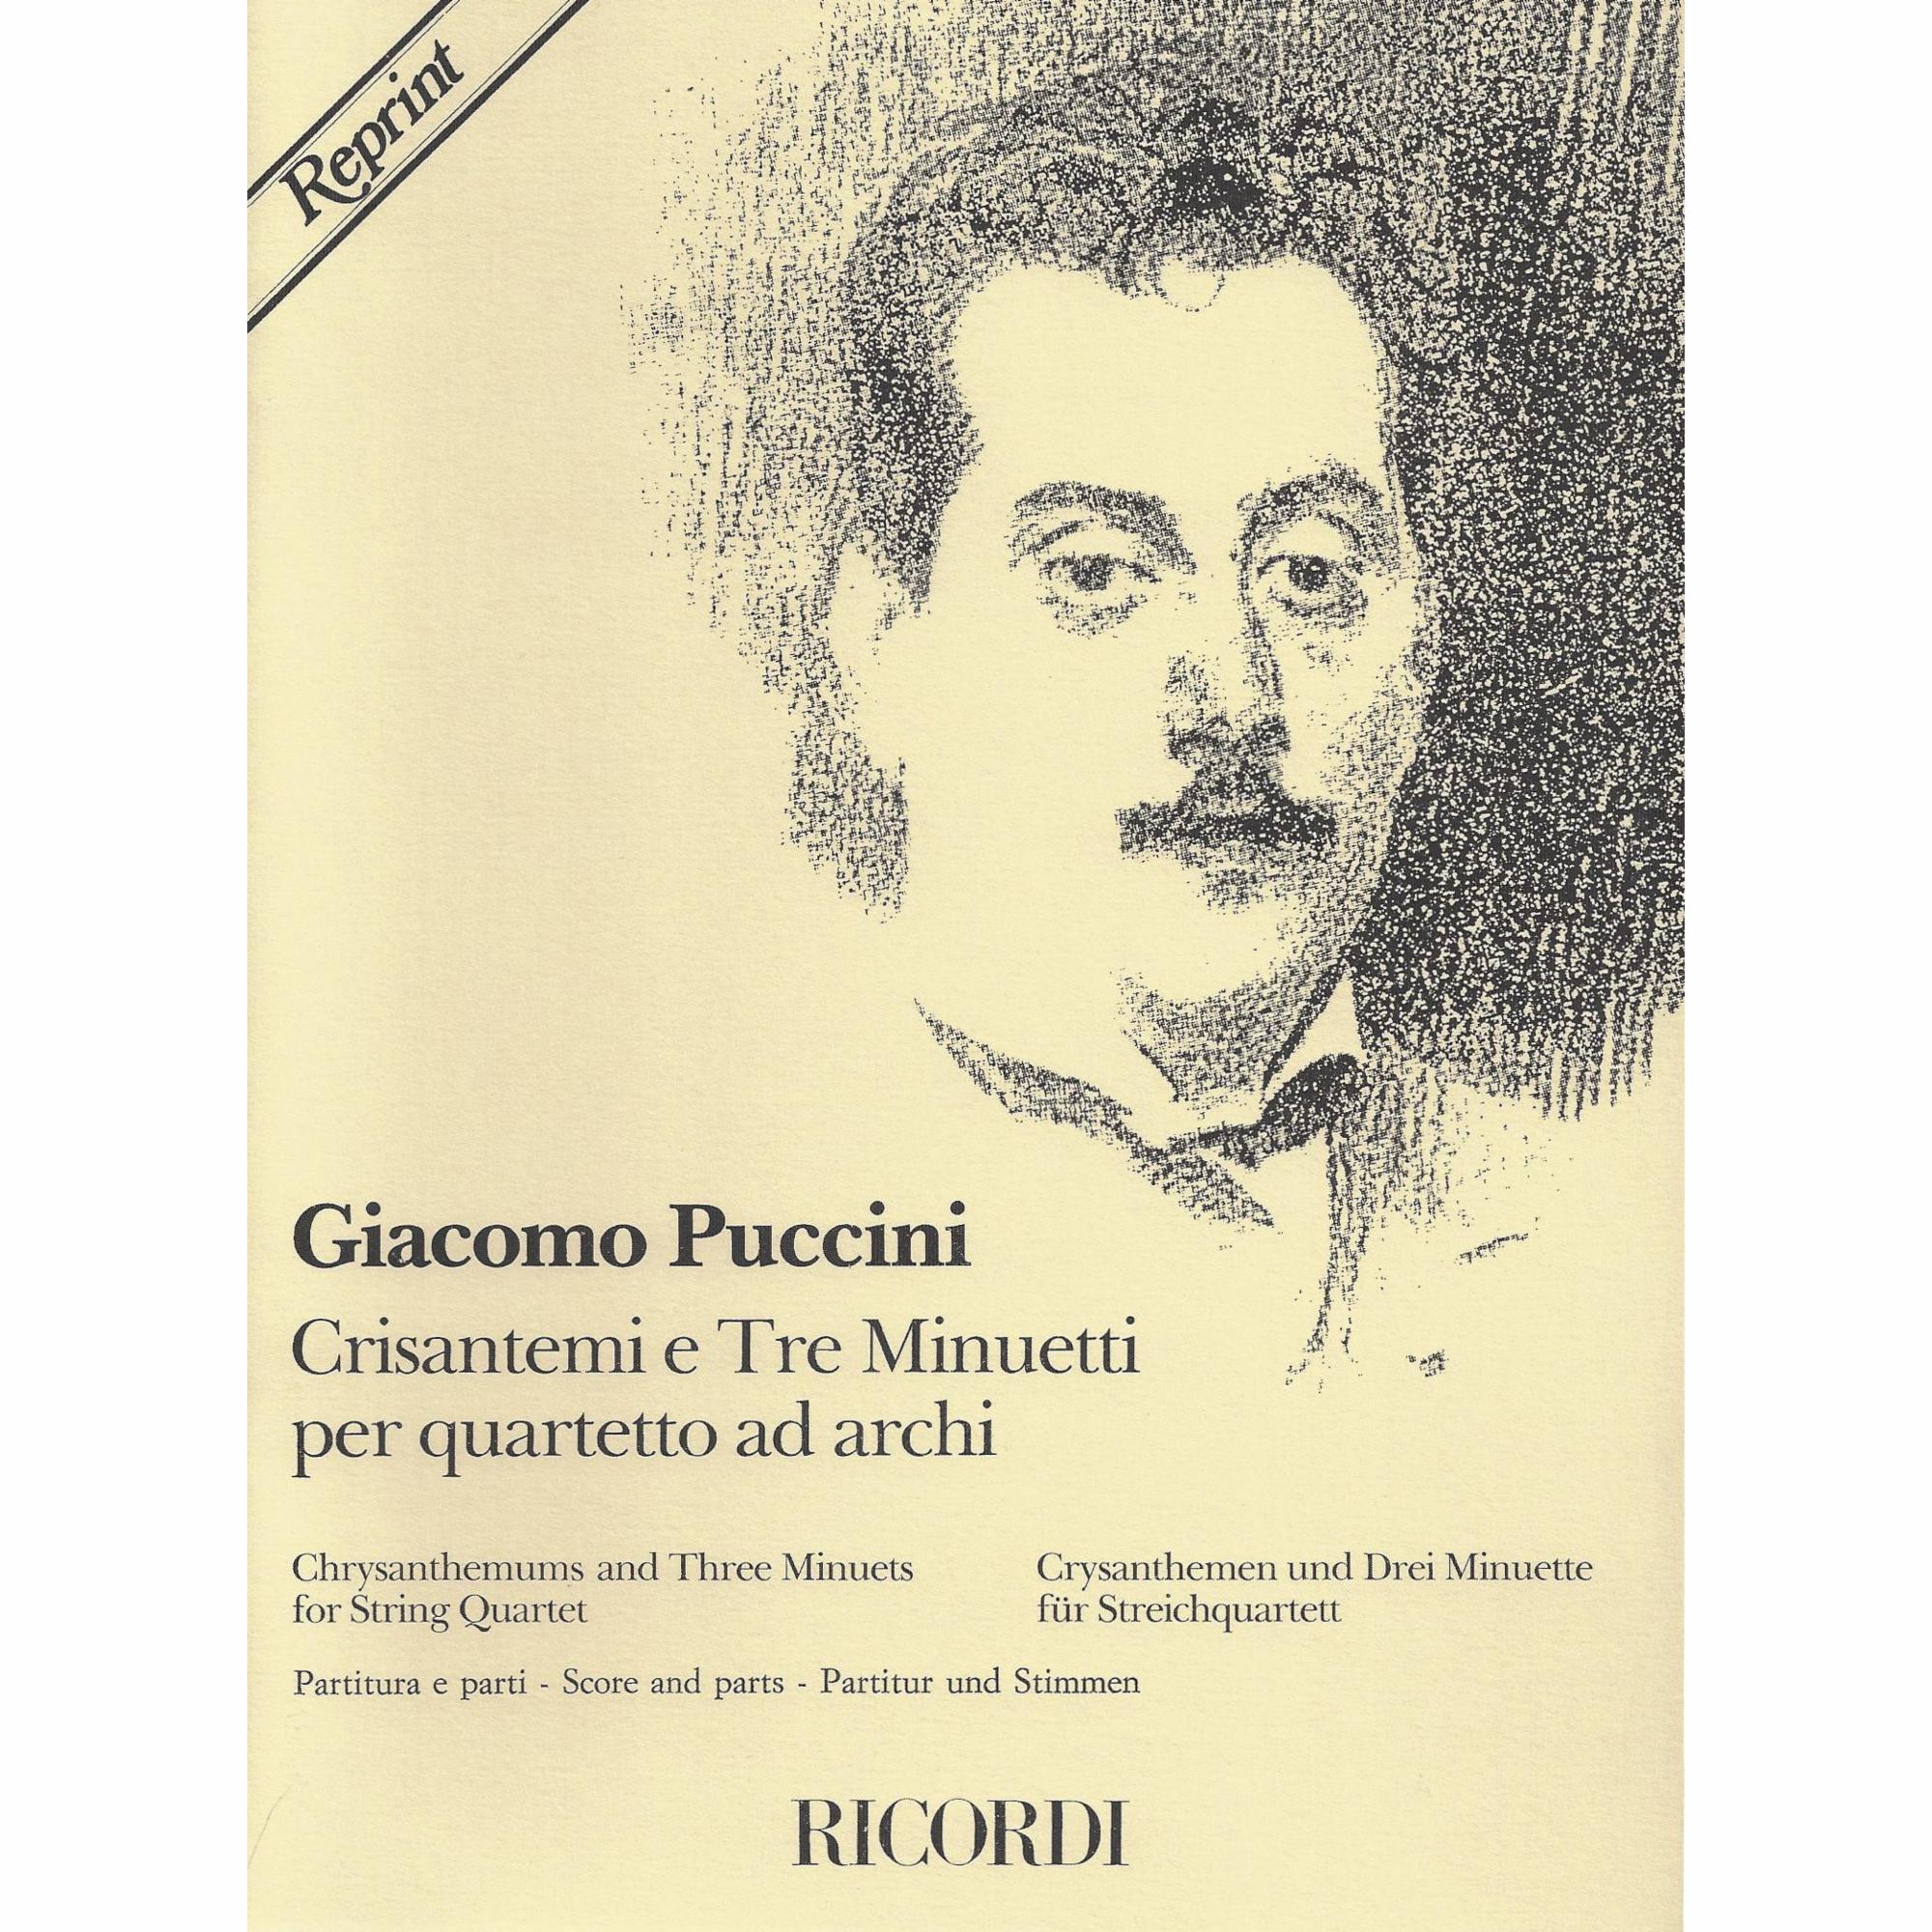 Puccini -- Chrysanthemums and Three Minuets for String Quartet